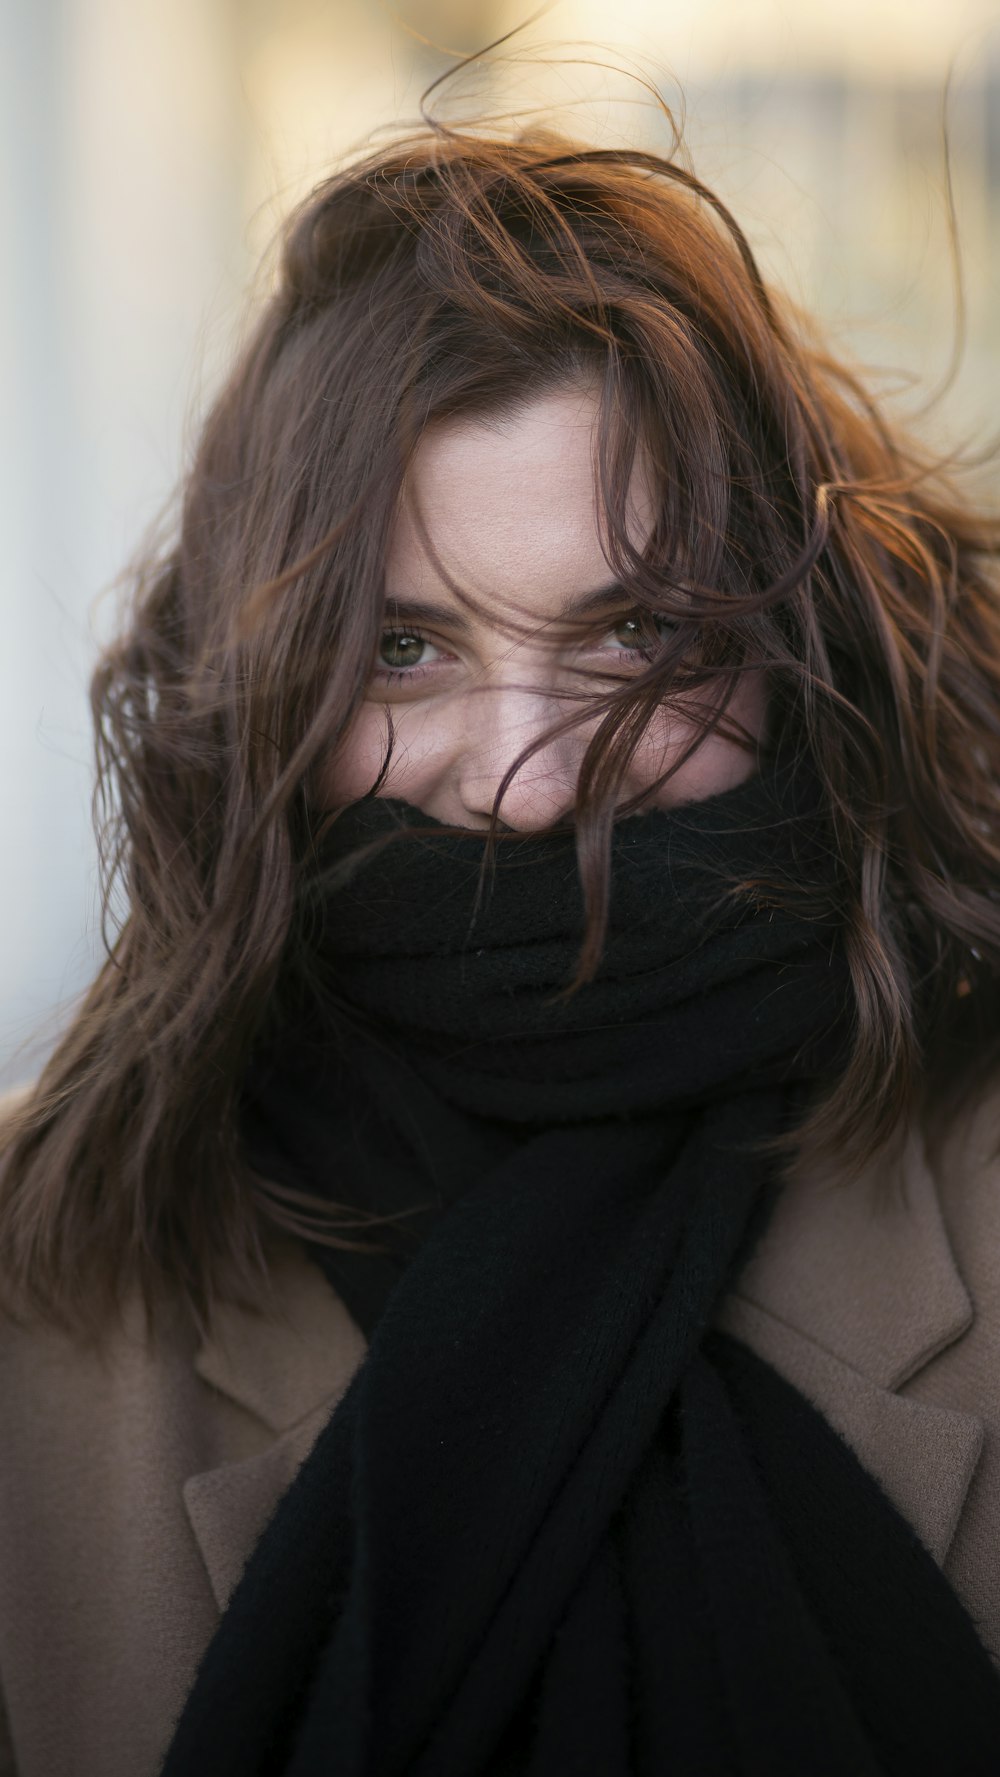 woman smiling and looking at the camera with scarf covering her mouth